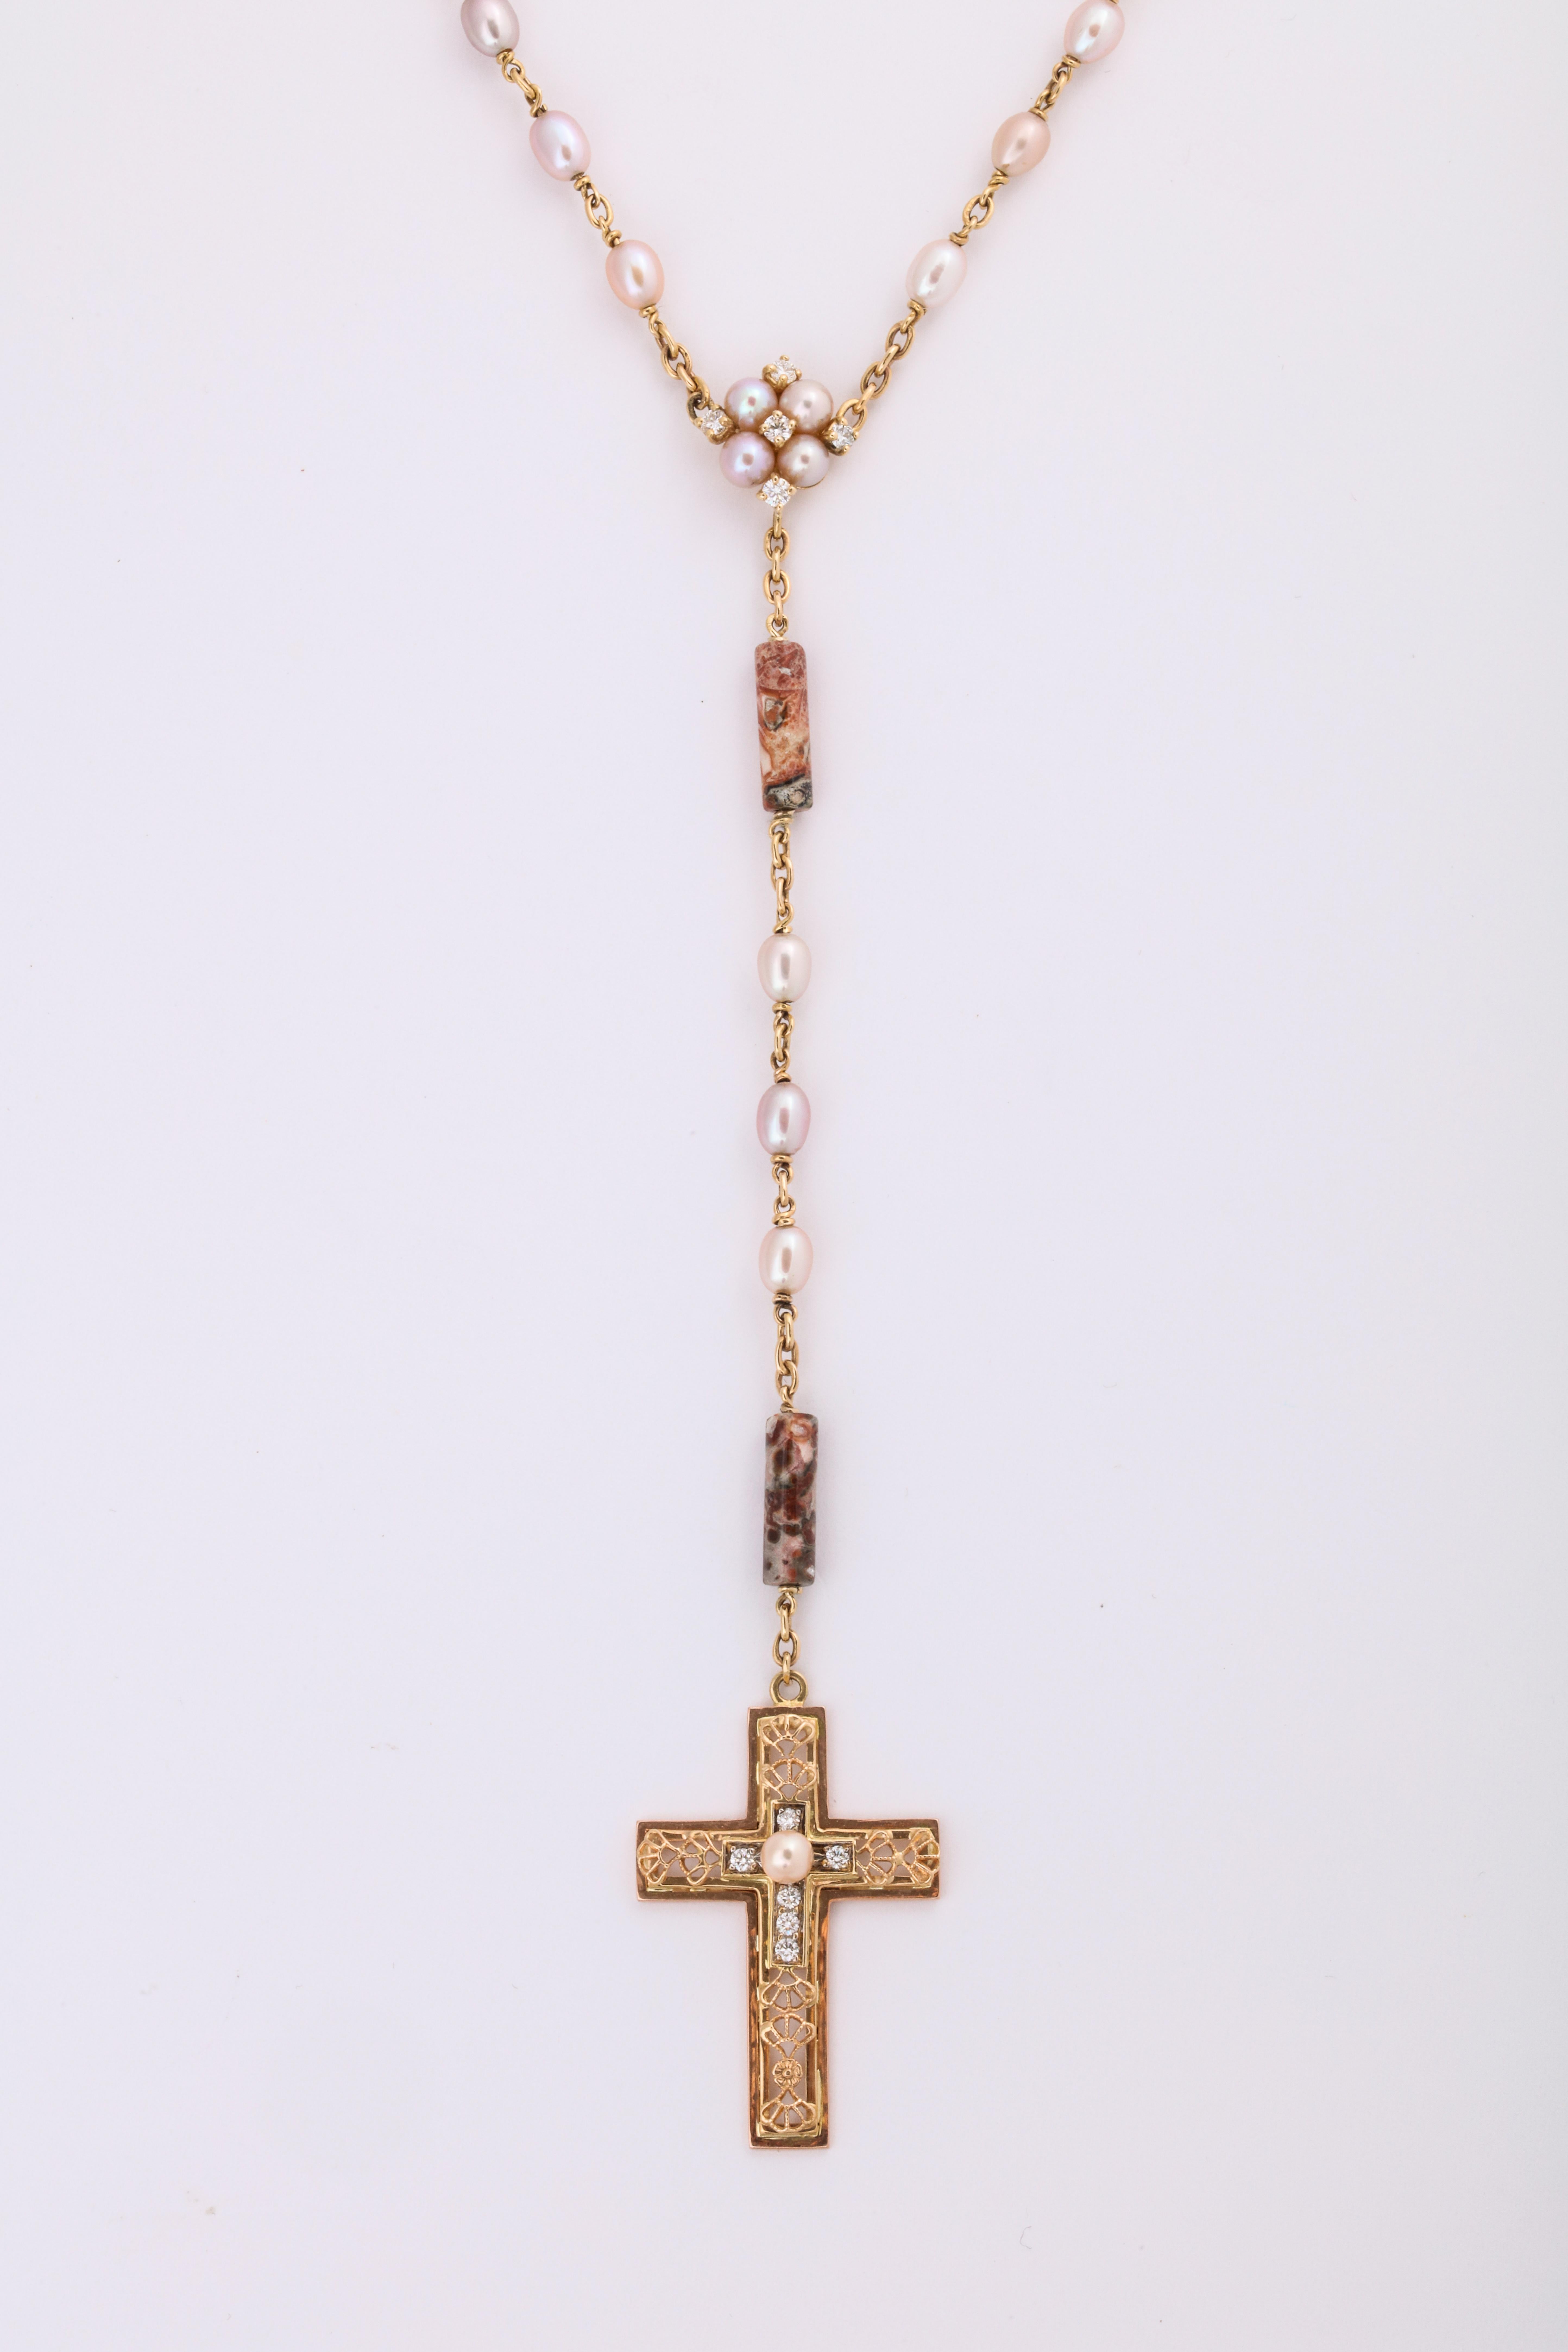 Donna Vock 14 Karat Gold Rosary with Pearls, Jasper and Diamonds In Excellent Condition For Sale In New York, NY